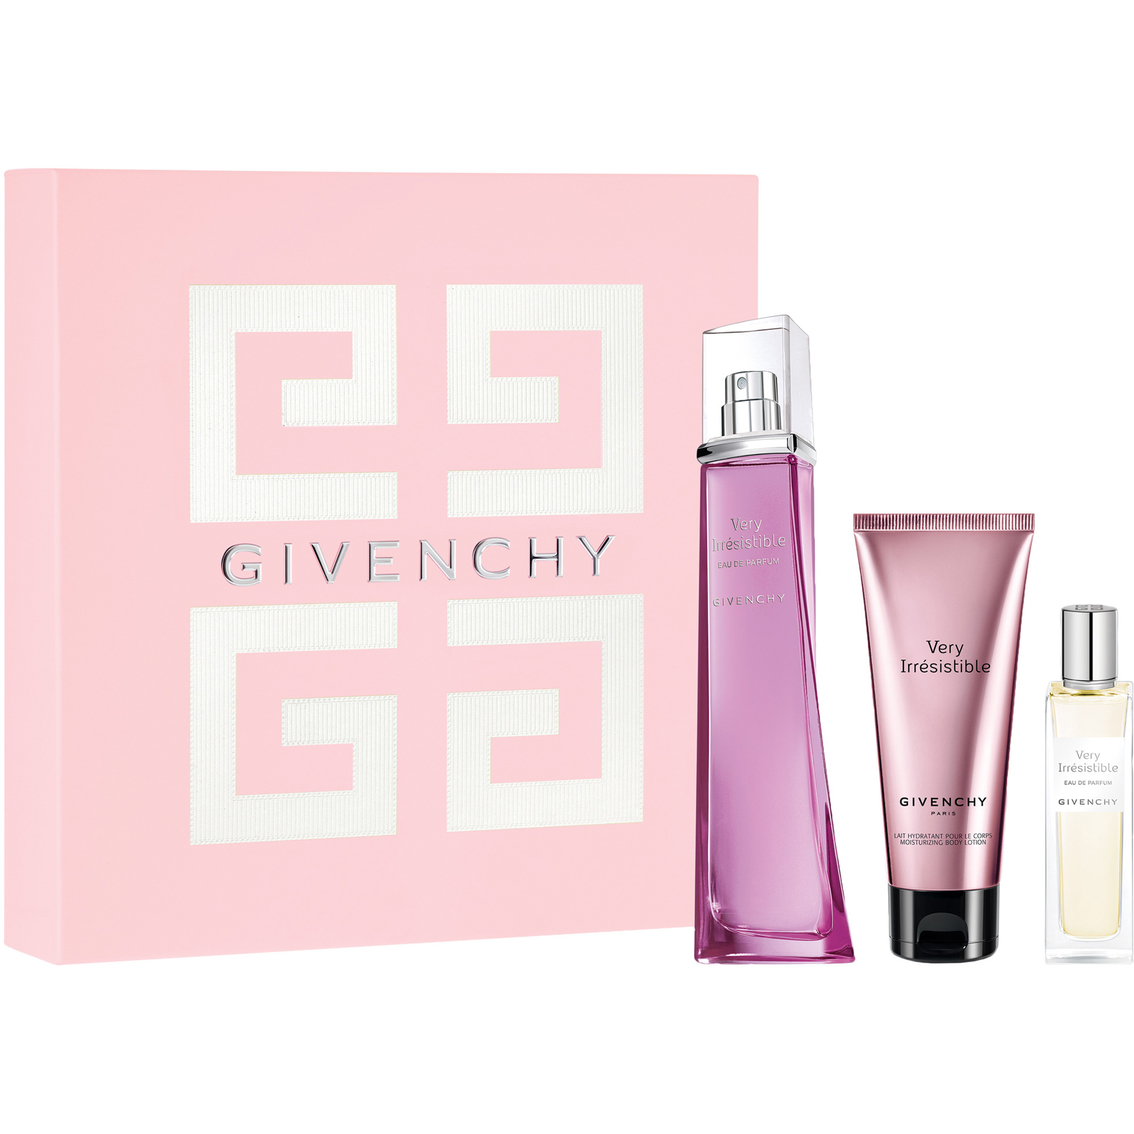 Givenchy Very Irresistible Eau De Parfum 3 Pc. Gift Set Gifts Sets For Her Beauty & Health